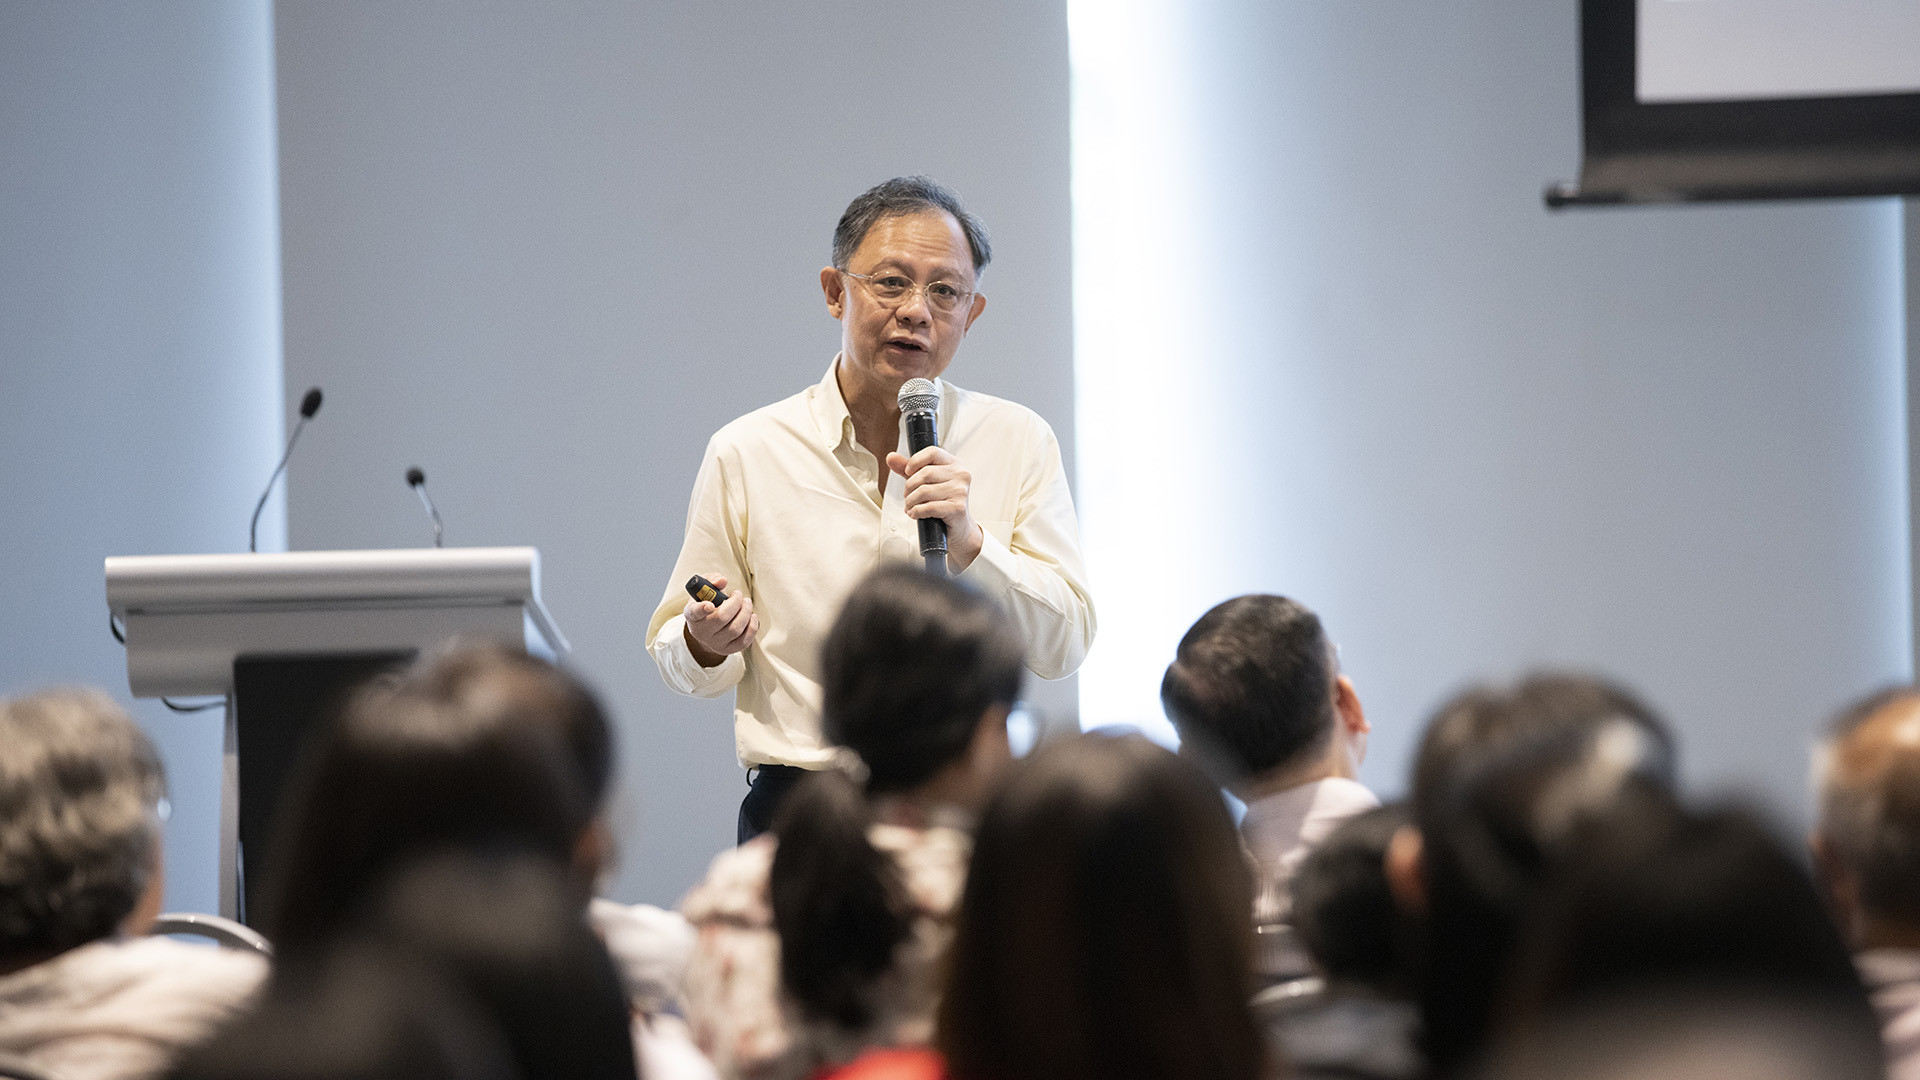 NUS Senior Vice Provost (Undergraduate Education) Professor Bernard Tan delivering his talk at the event hosted by the NUS Office of Alumni Relations entitled “NUS Education Today: Shaping Talent for the Future”.